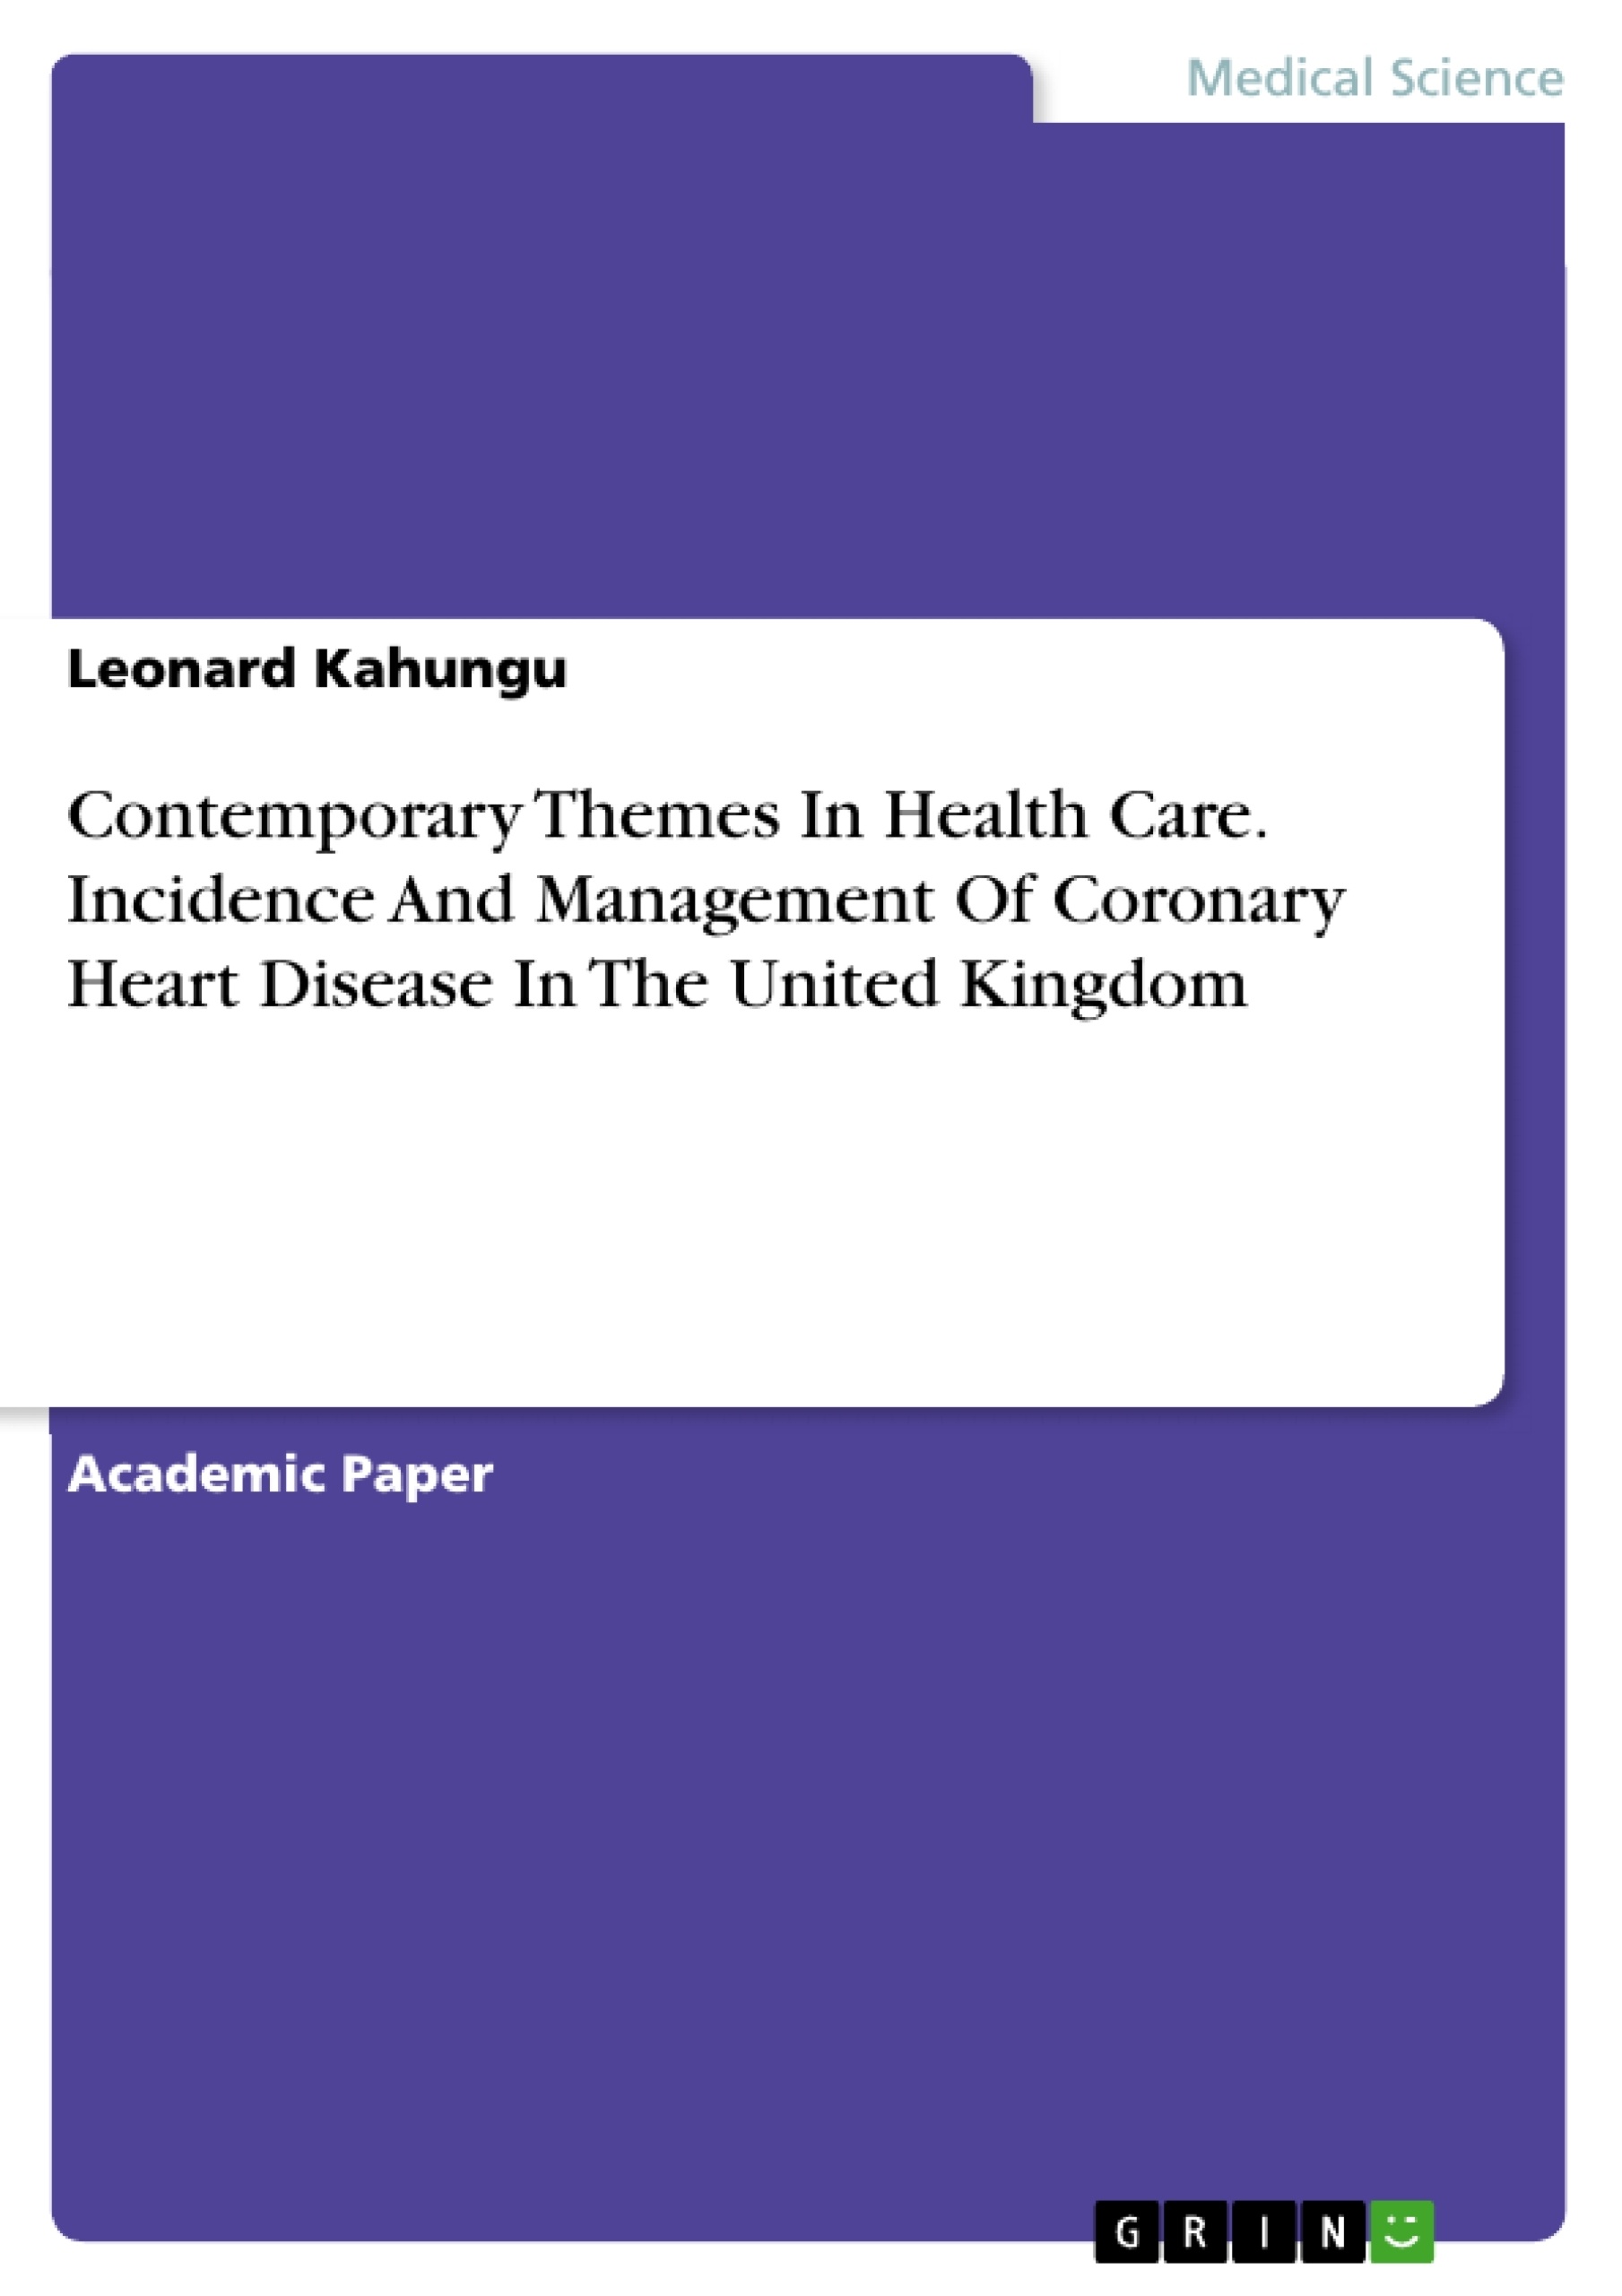 Titre: Contemporary Themes In Health Care. Incidence And Management Of Coronary Heart Disease In The United Kingdom